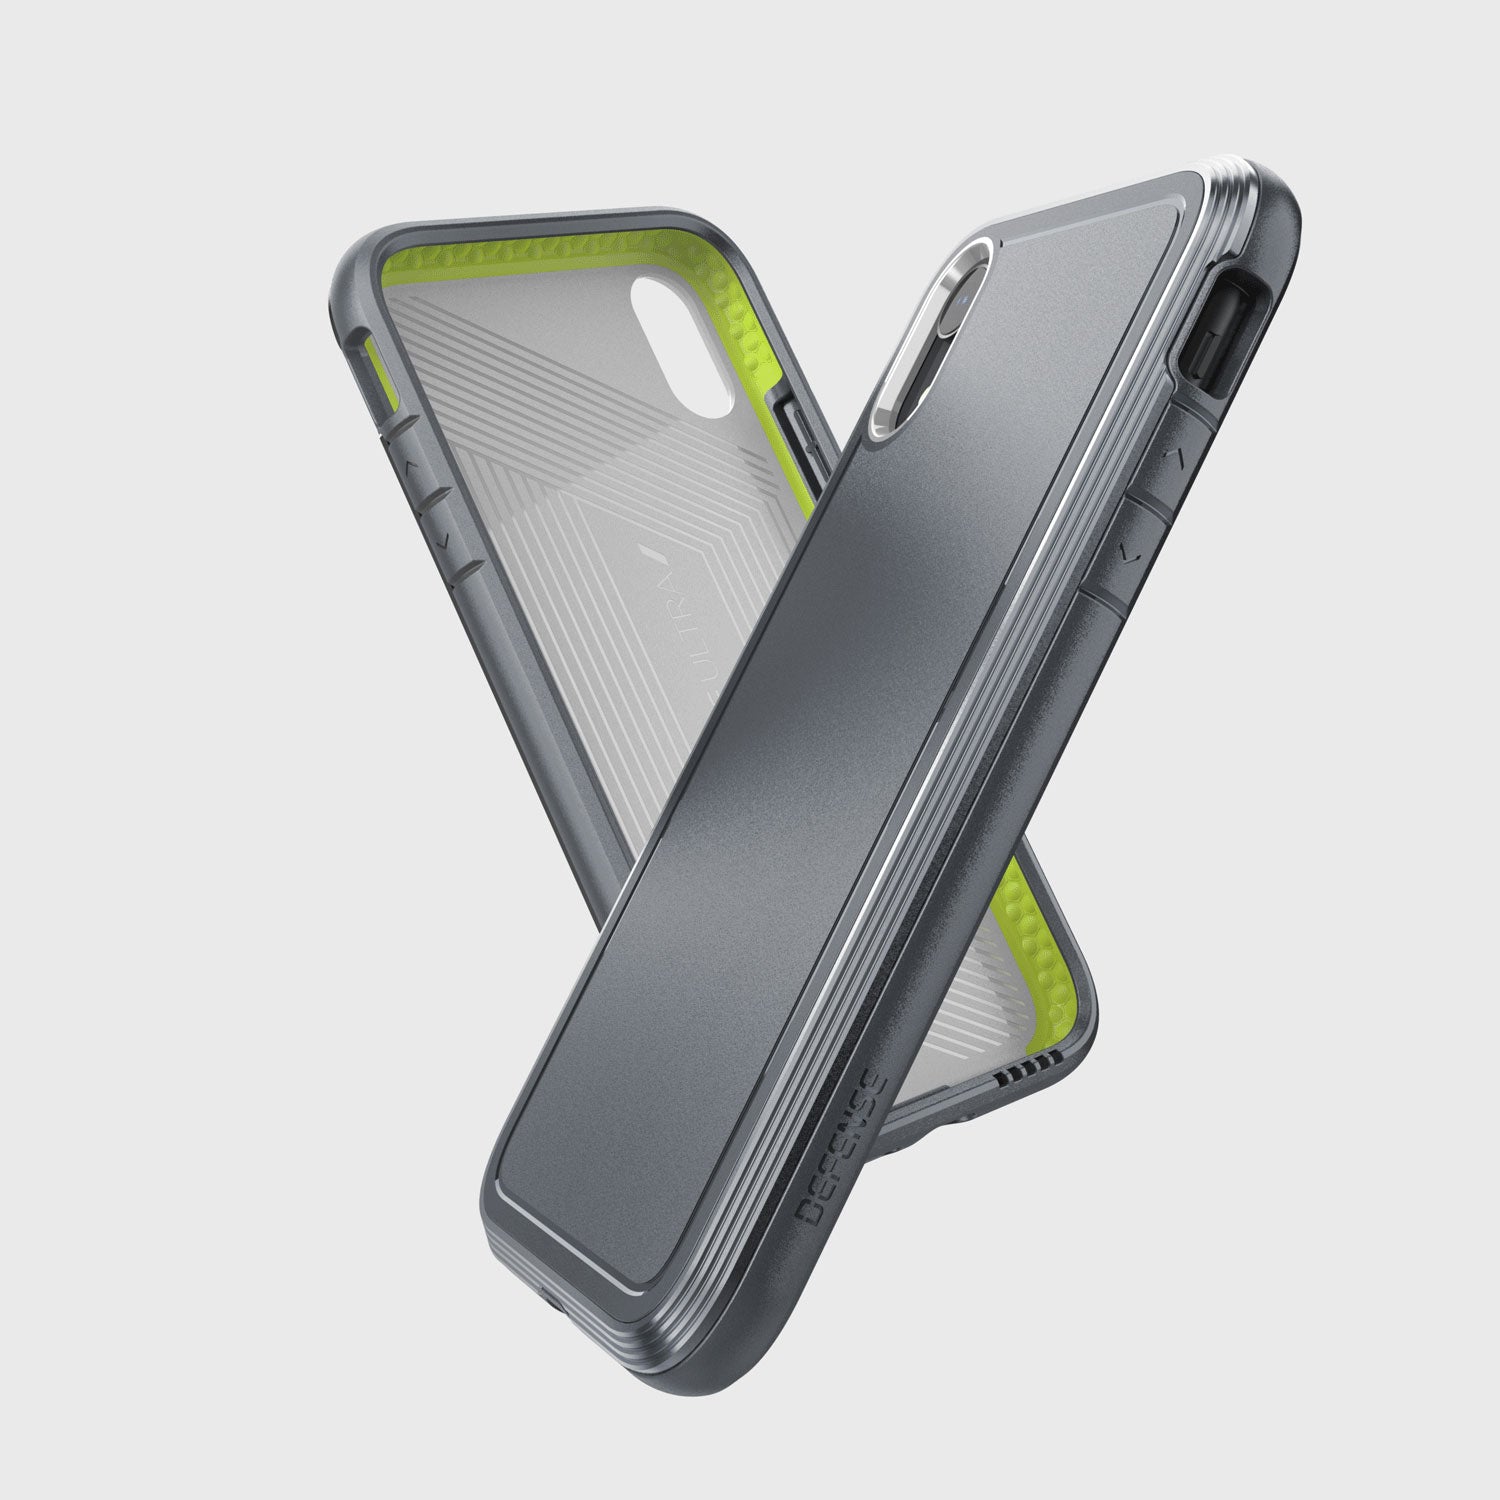 An iPhone XR Case - ULTRA by Raptic, showcasing a grey and green color scheme against a clean white background.